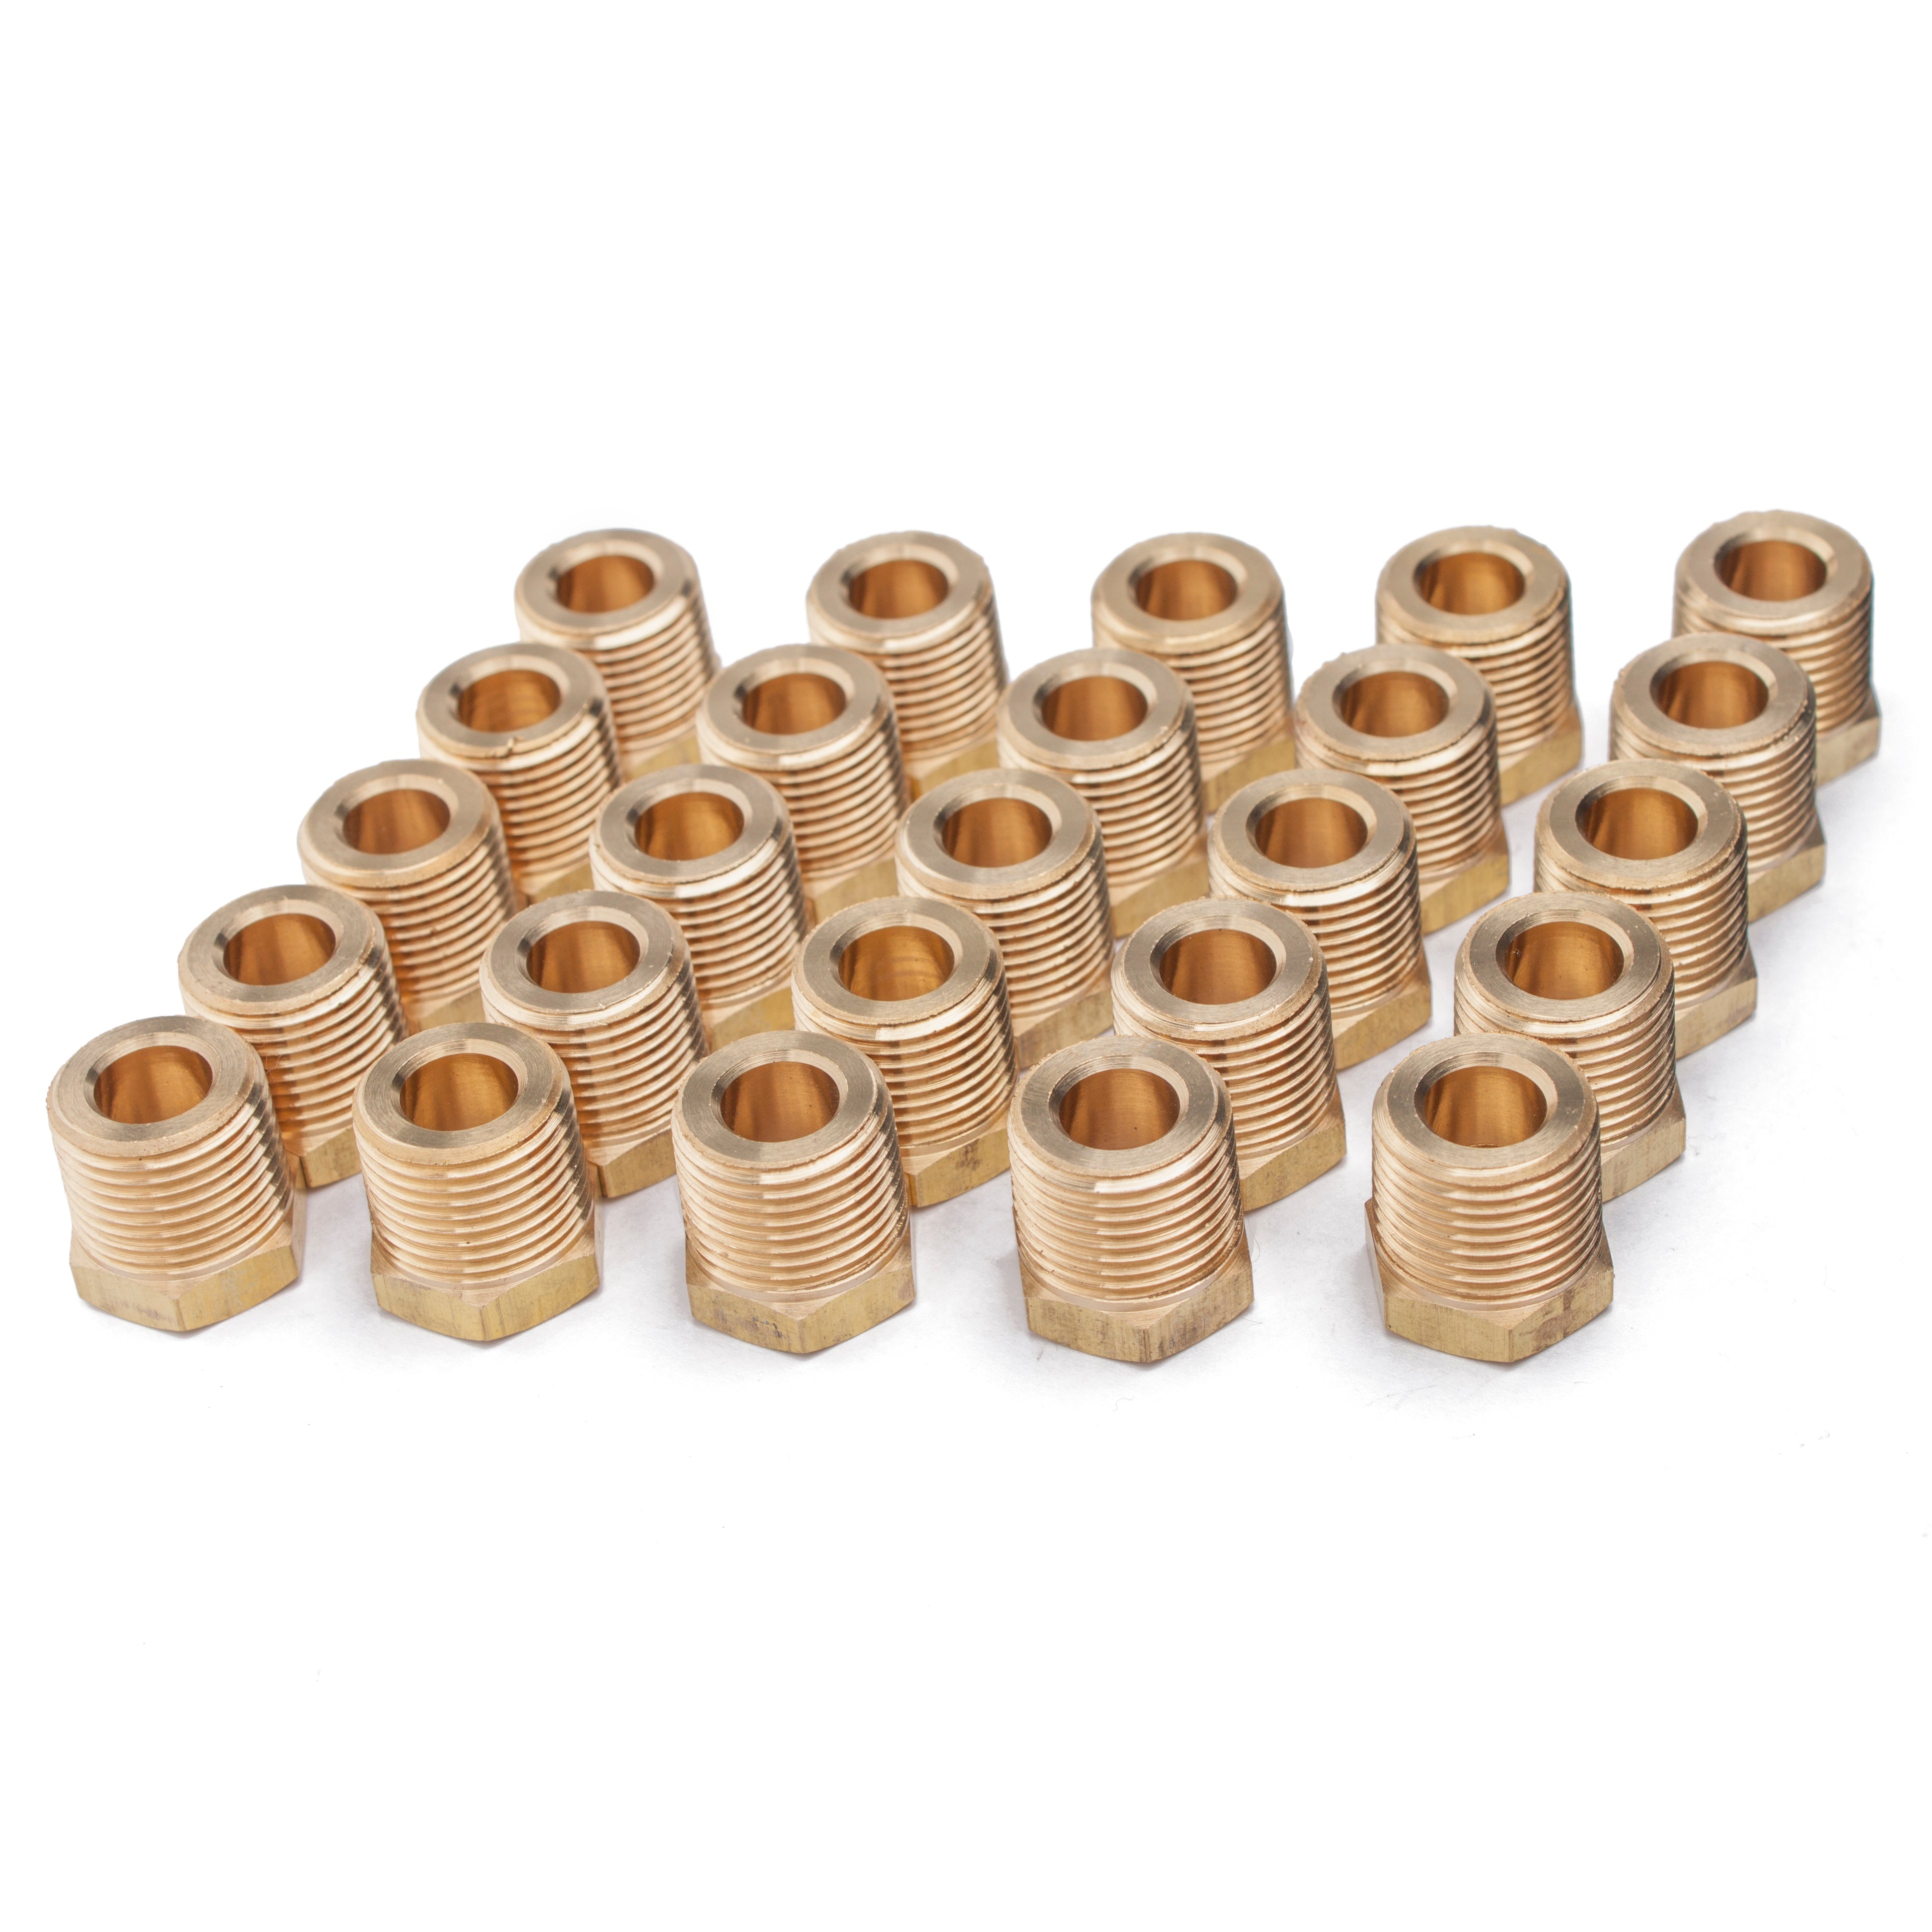 LTWFITTING Brass BSP Pipe Hex Bushing Reducer Fittings 3/8-Inch Male x 1/8-Inch Female BSPP (Pack of 25)